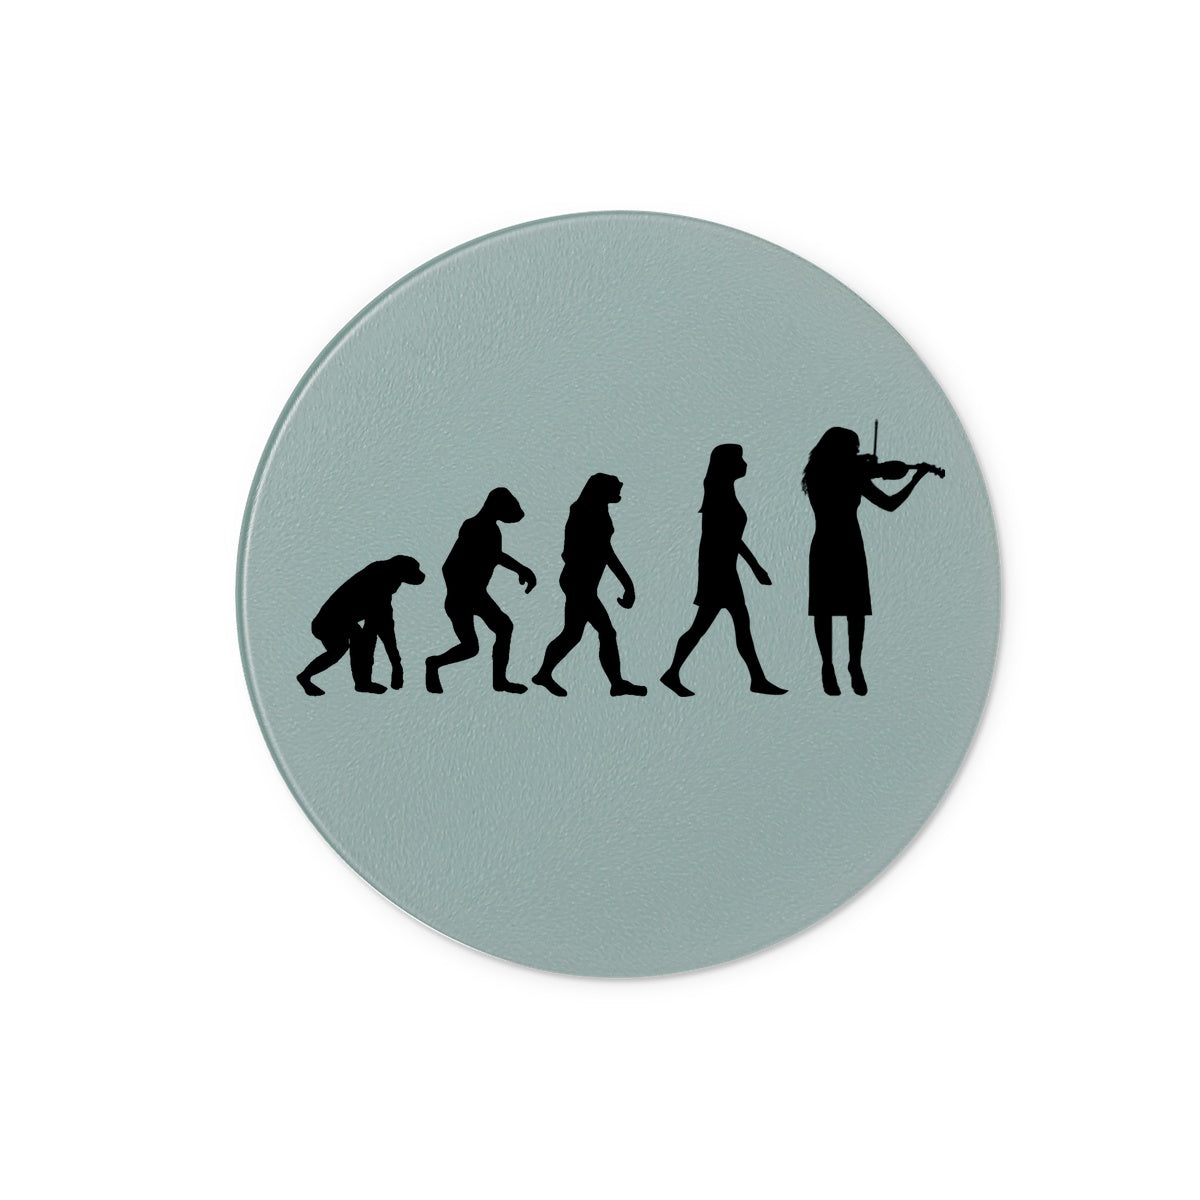 Evolution of Female Fiddle Players Glass Chopping Board